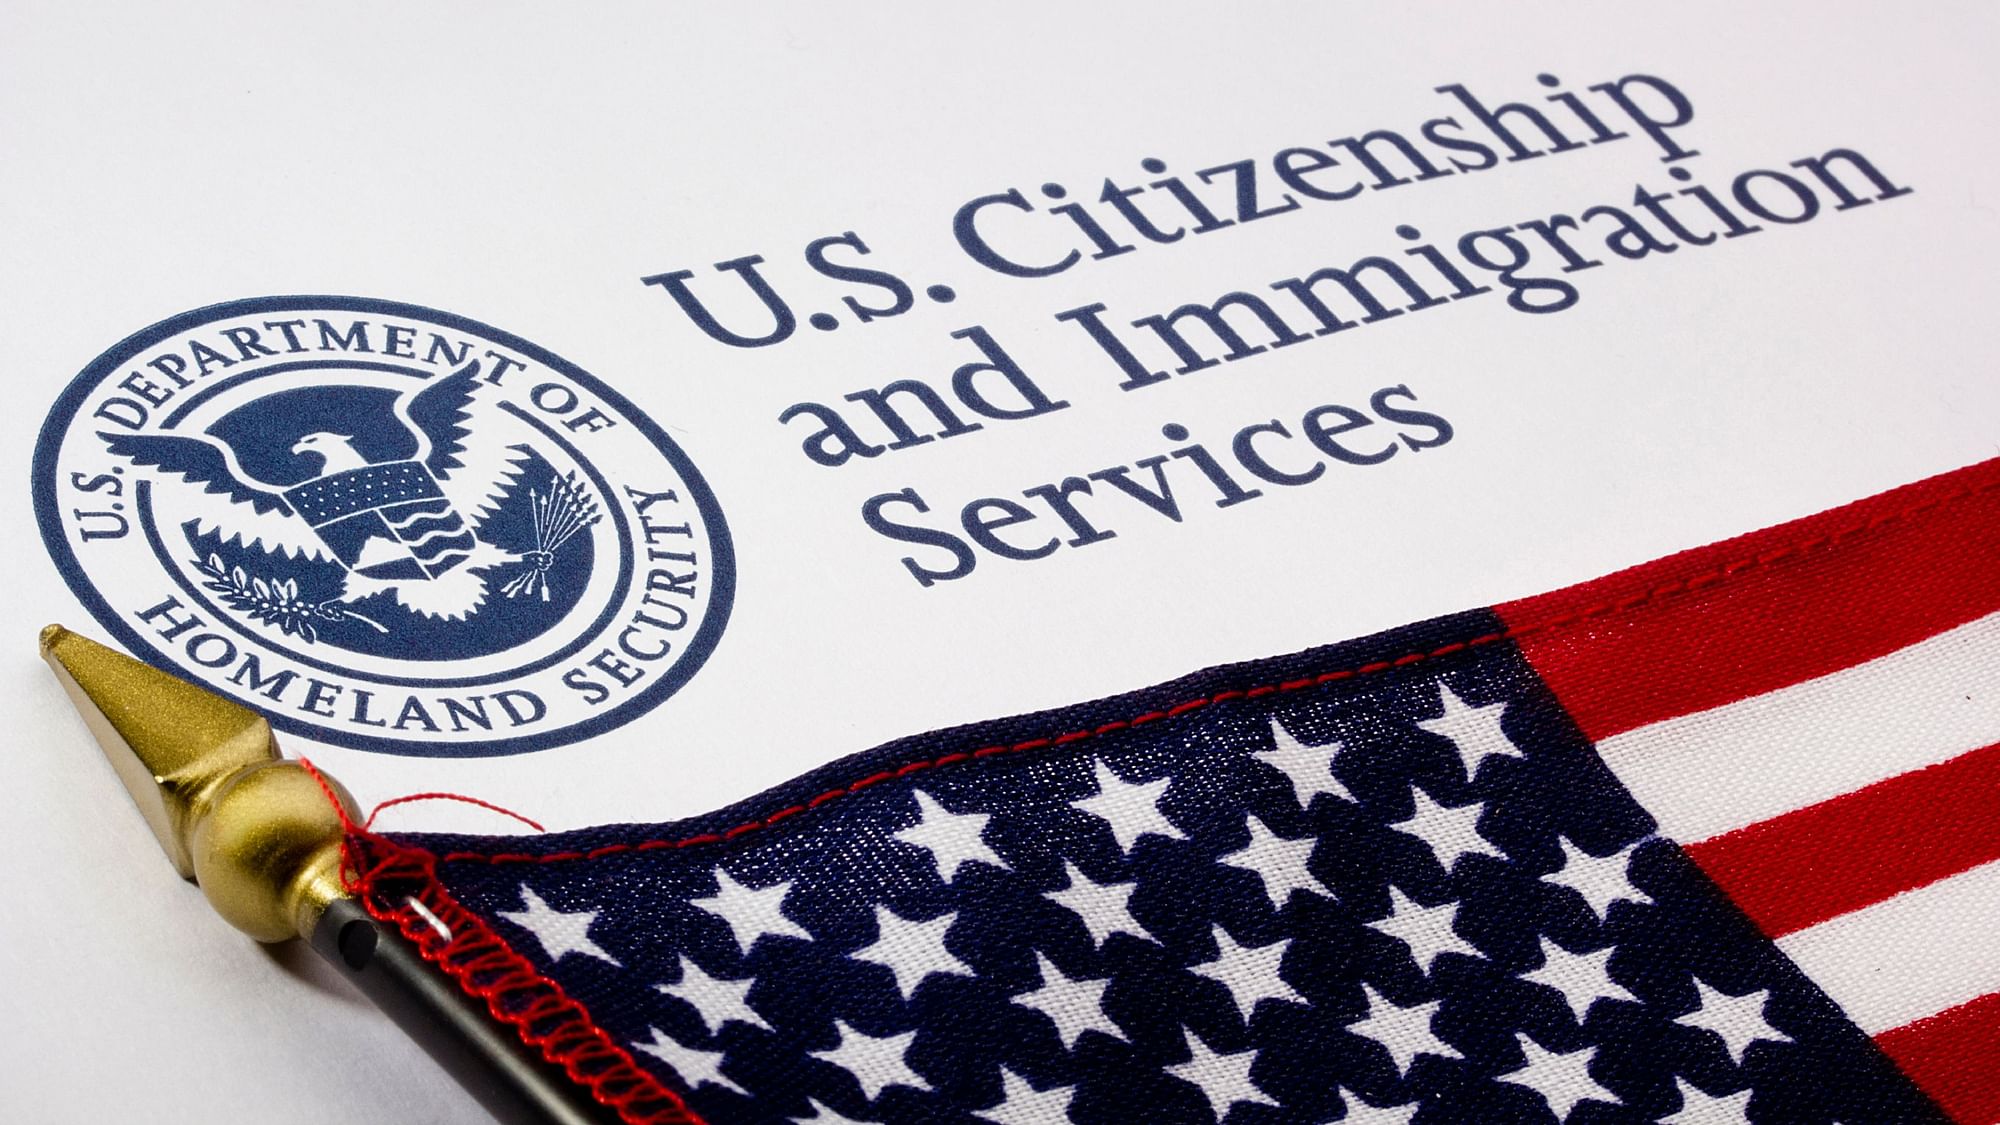 <div class="paragraphs"><p>Indians cornered nearly three-fourths of H-1B visas issued by the US to speciality foreign workers in 2021, continuing their stranglehold on this highly sought after professional ticket to work, live and, finally, settle down in America.</p></div>